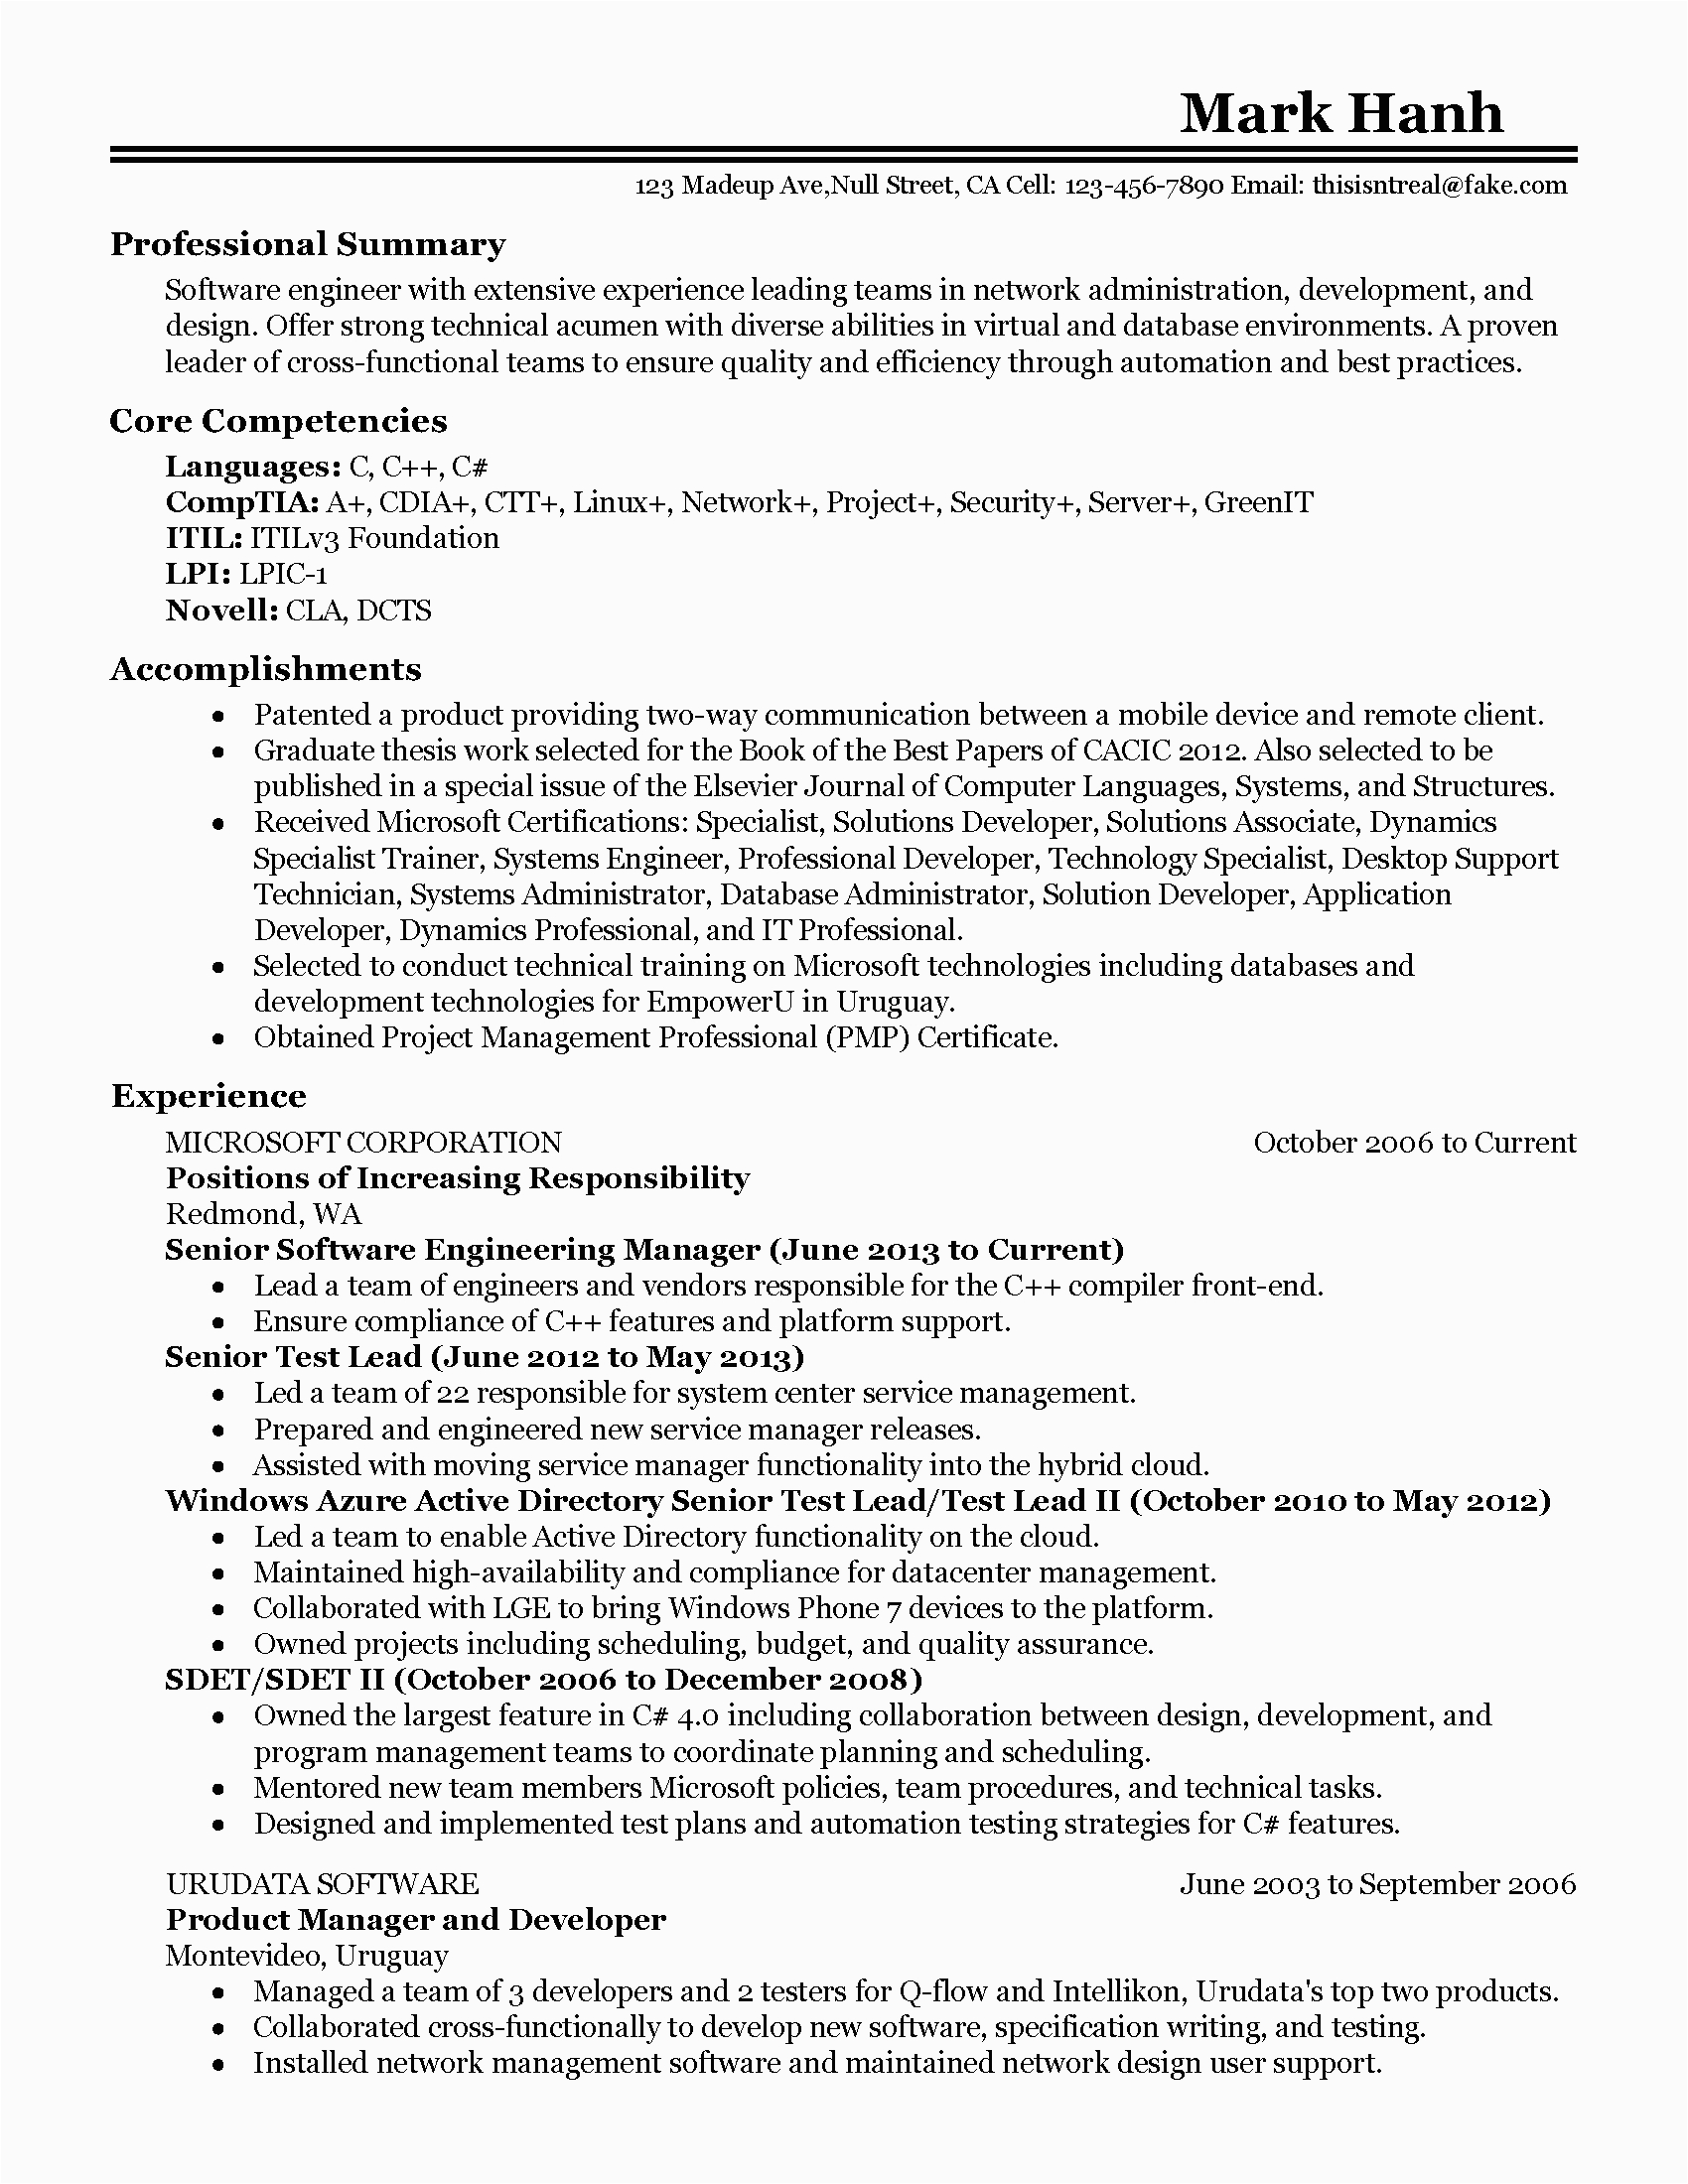 Sample Resume for software Engineer with 2 Years Experience Resume 2 Years Experience software Enginer